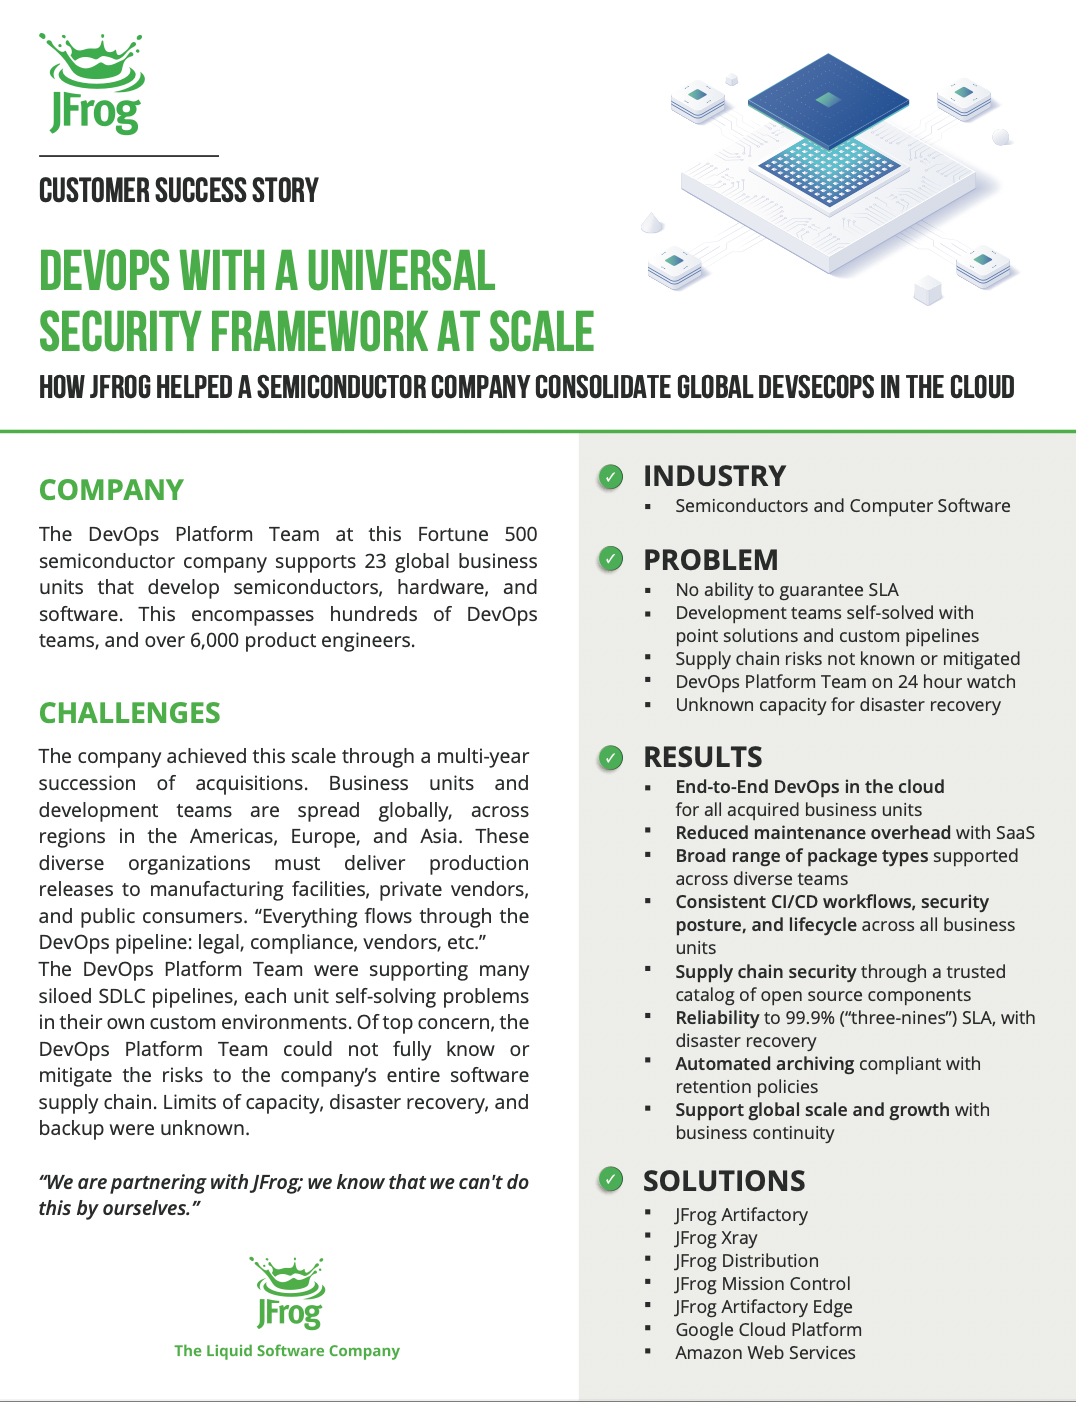 How JFrog helped a semiconductor company consolidate global DevSecOps in the cloud